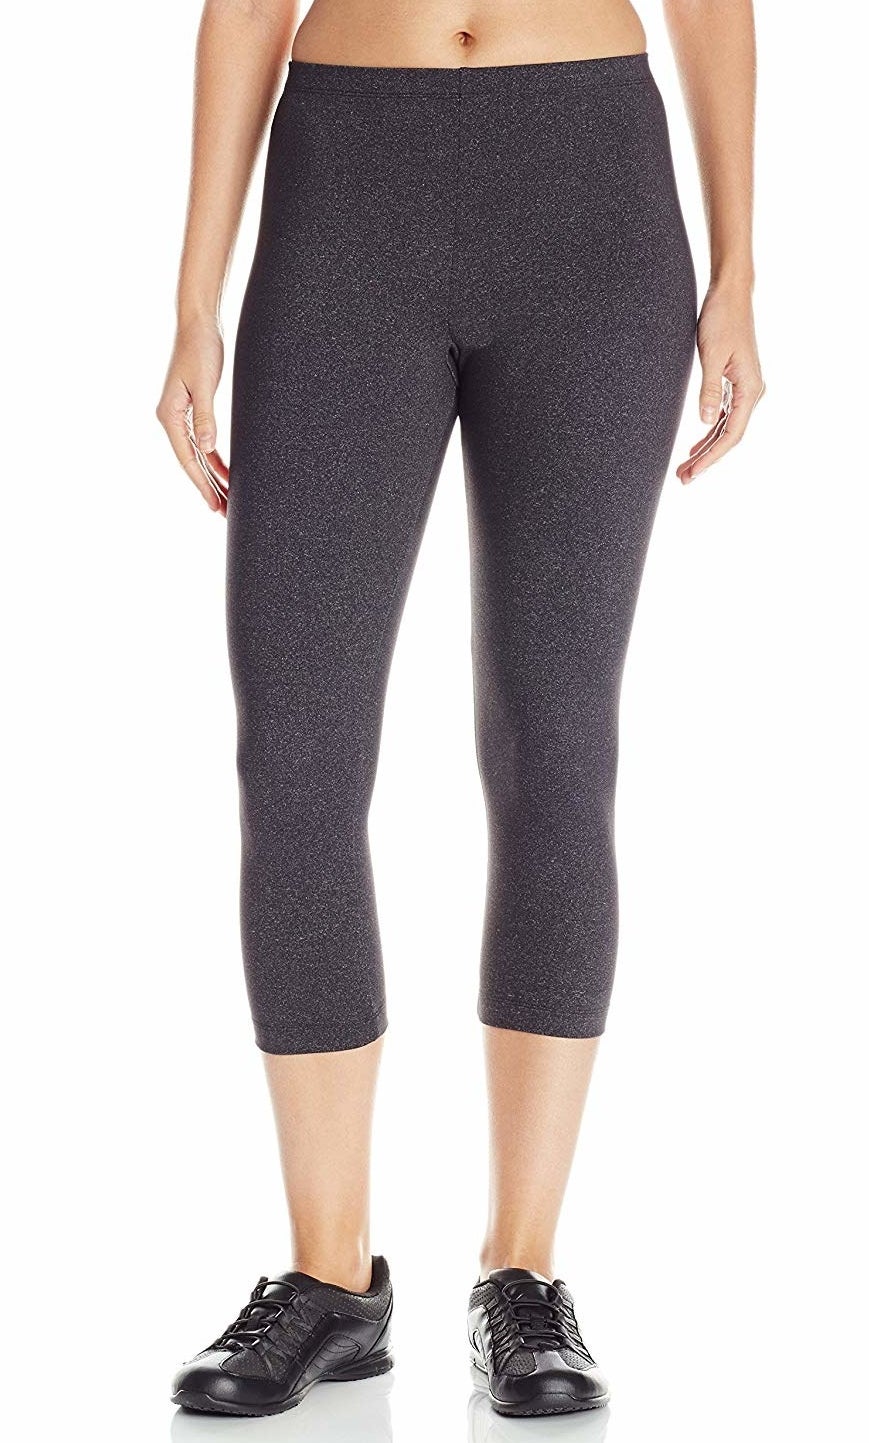 17 Of The Best Pairs Of Leggings You Can Get On Amazon